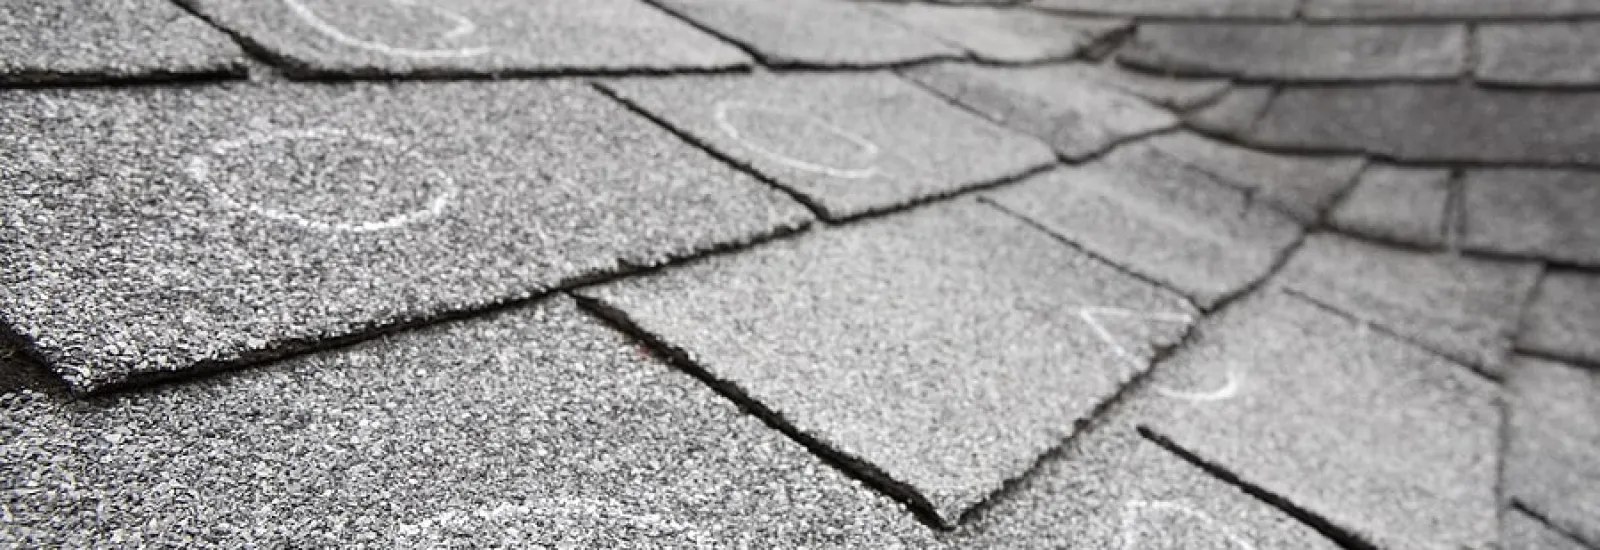 How to Tell if Your Roof Has Hail Damage